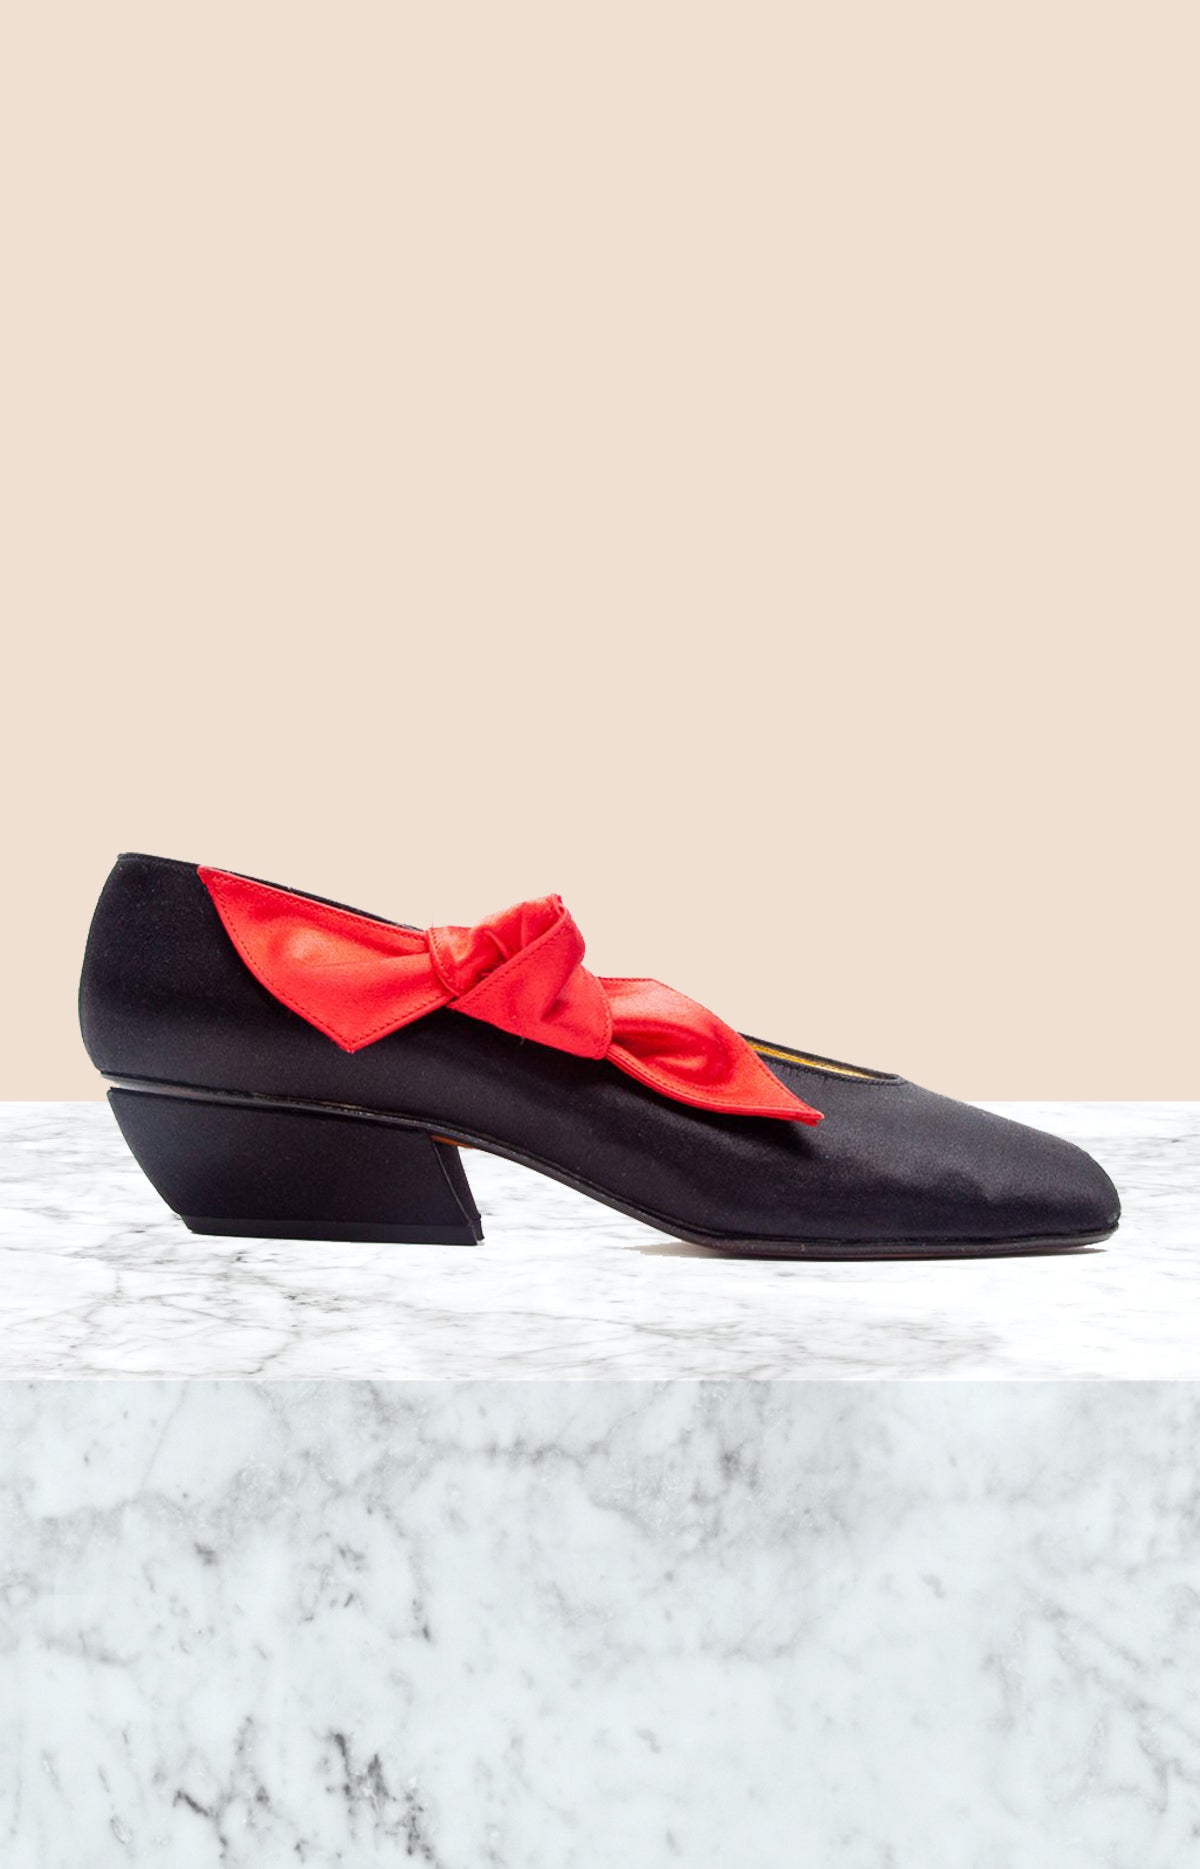 walter steiger vintage pumps with red bow